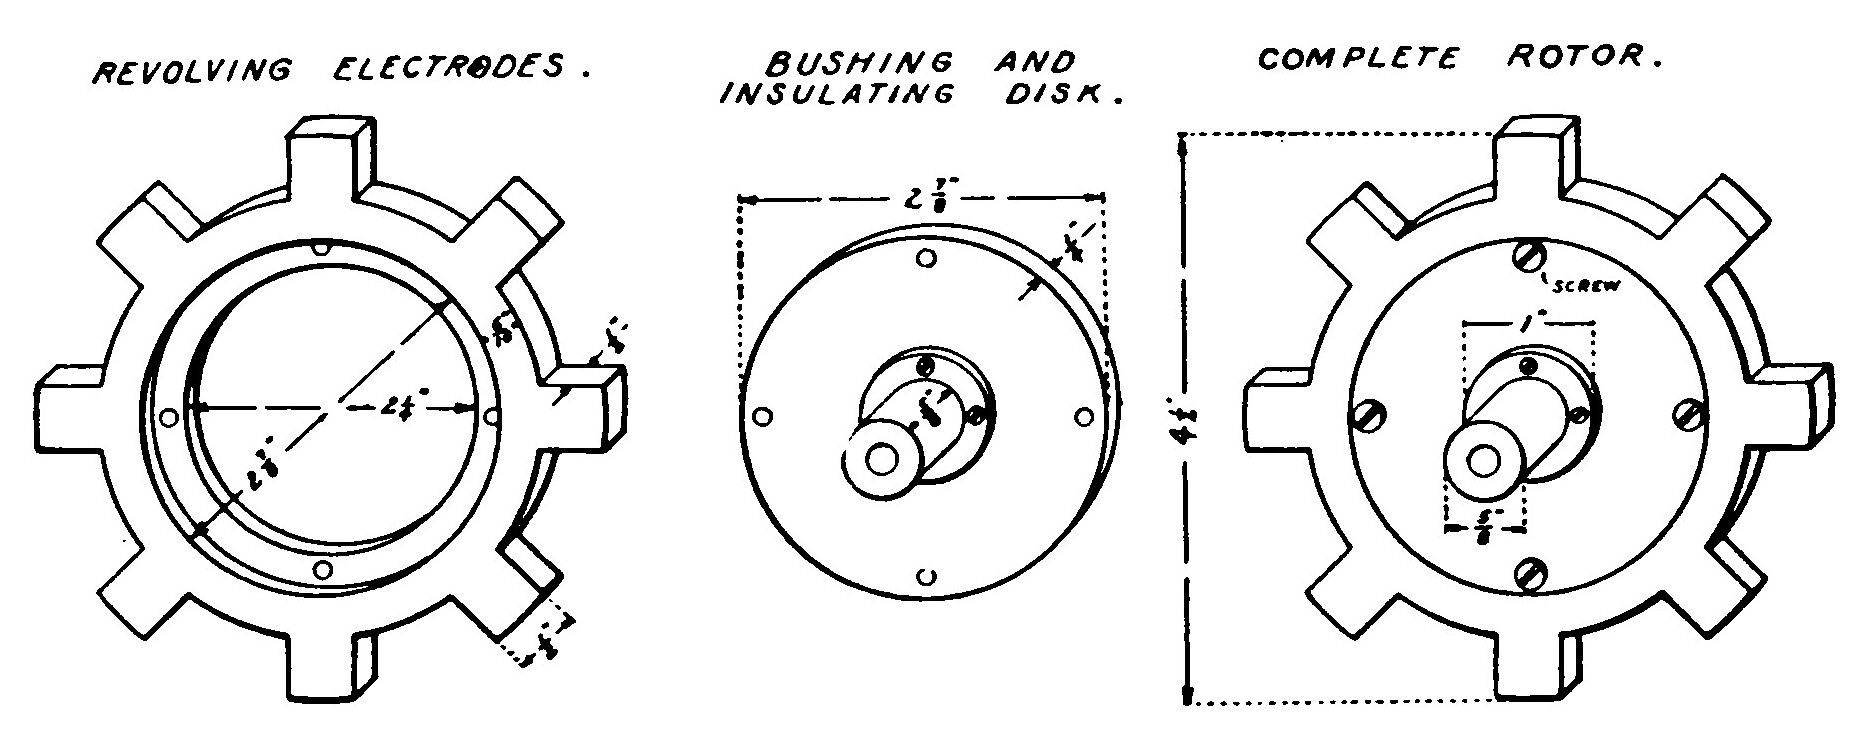 Fig. 158. Details of Revolving Parts of Rotary Gap.